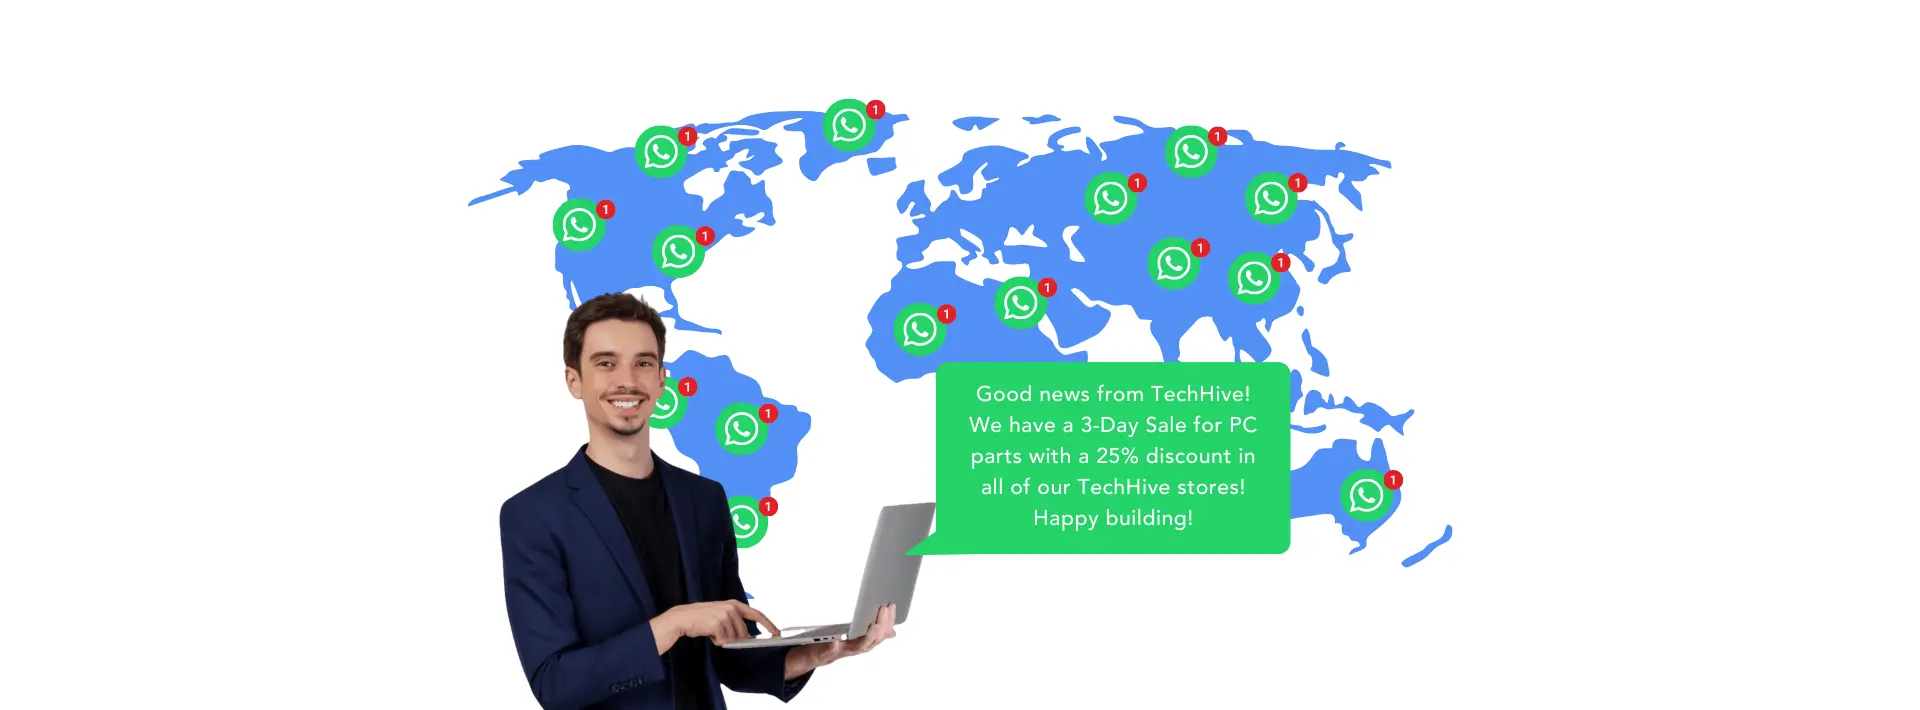 Sending a WhatsApp Broadcast Message to thousands of users worldwide through WhatsApp 